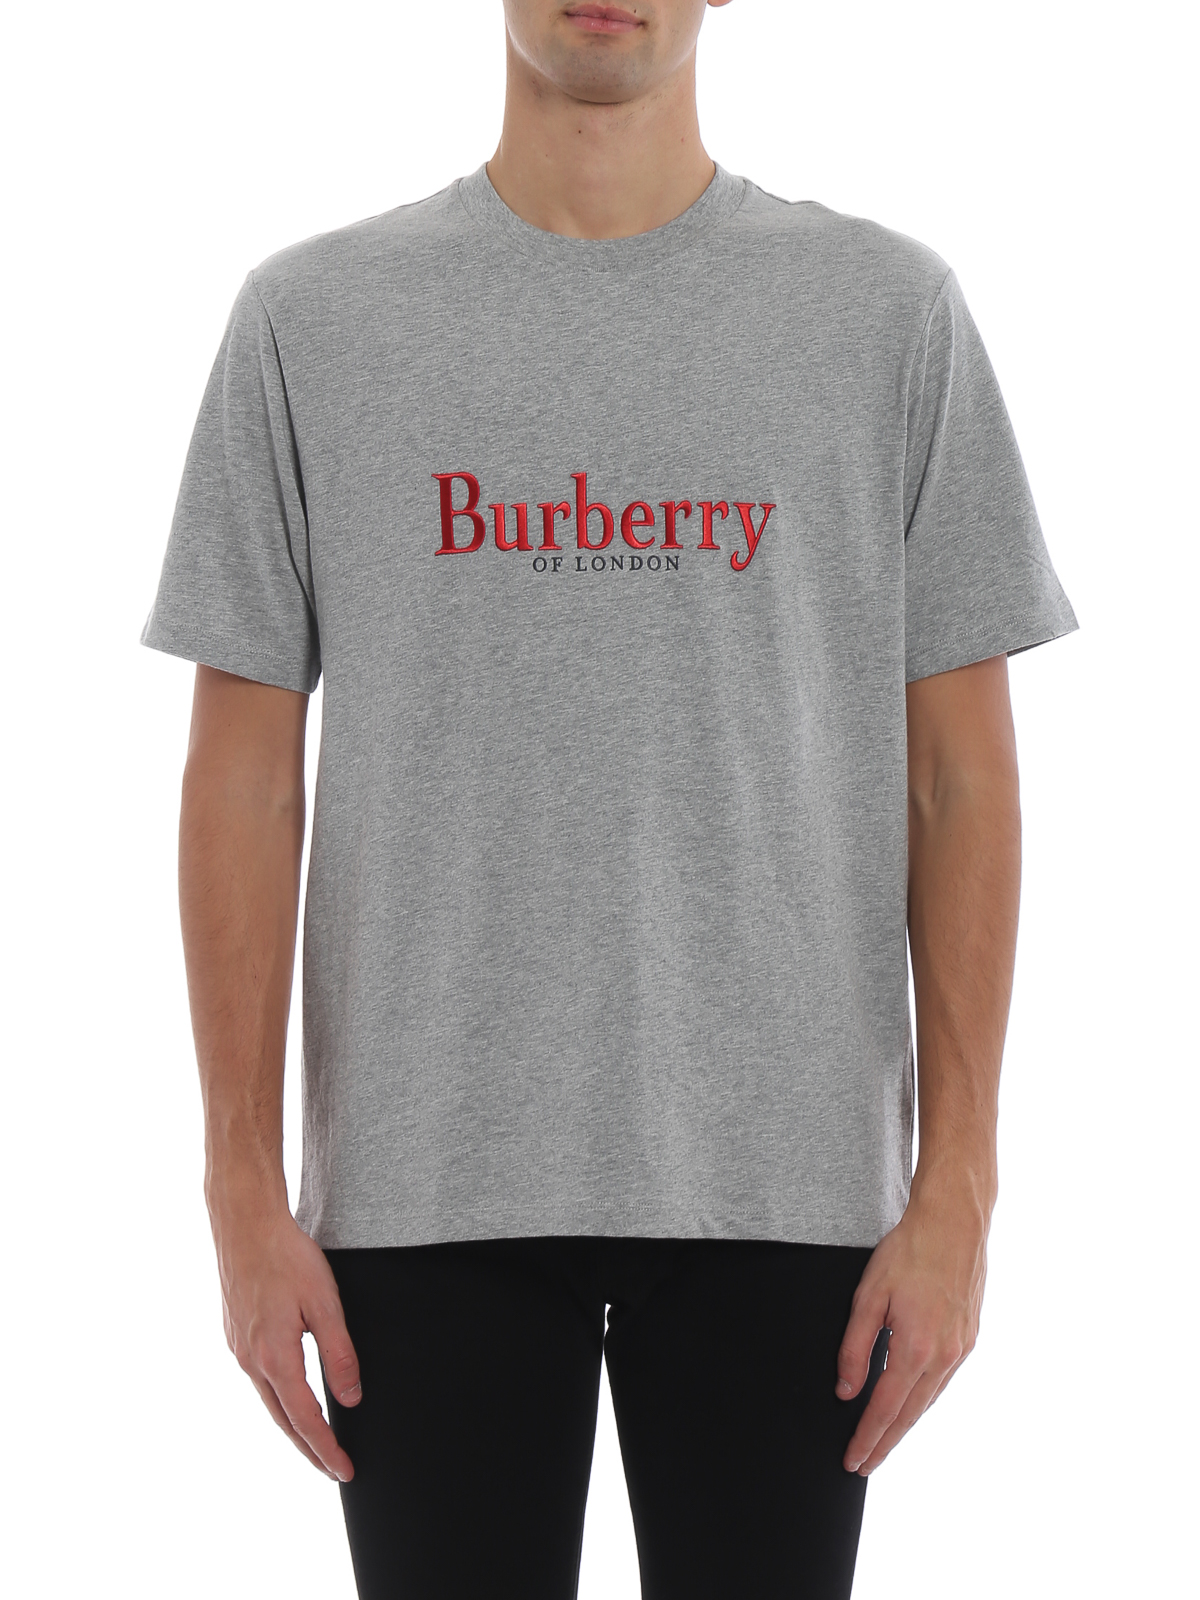 Burberry - Lopori grey cotton T-shirt with archive logo - t-shirts ...